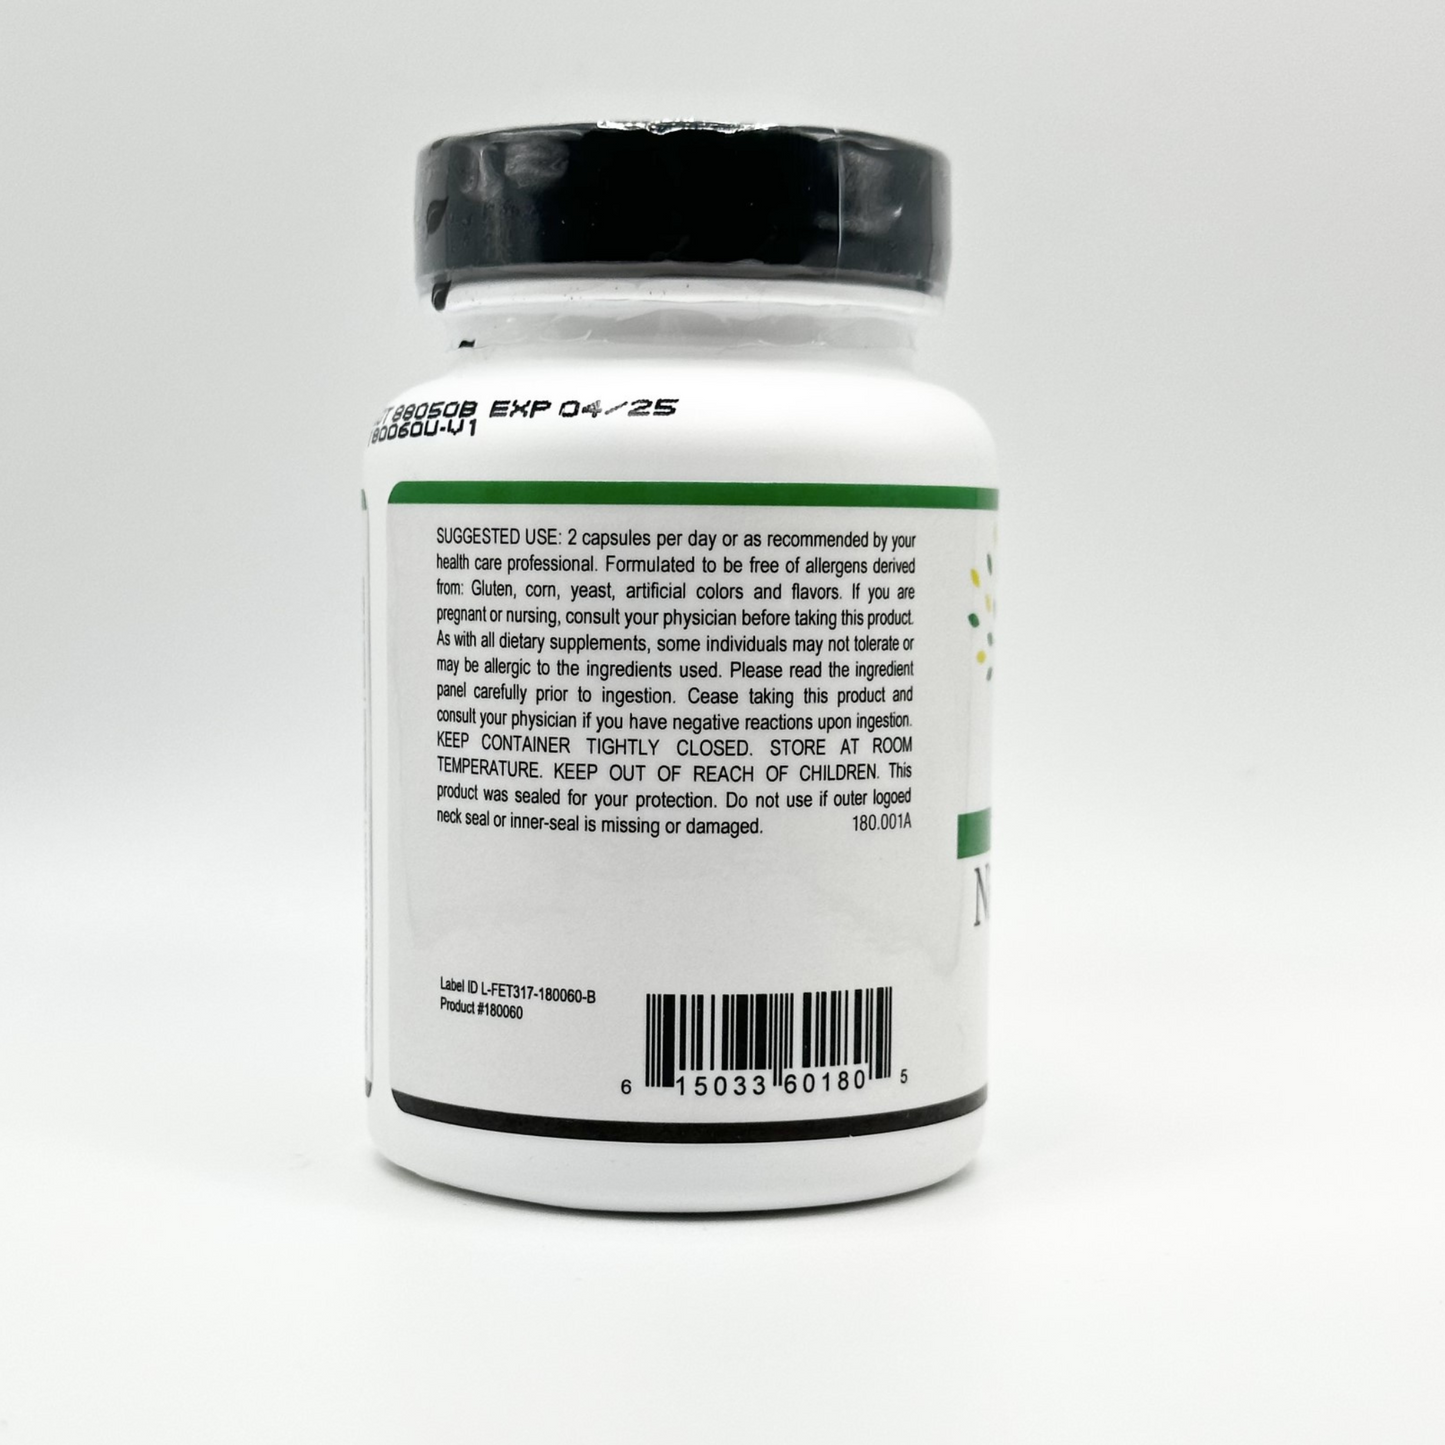 (Nitric Oxide Sustain) 60ct